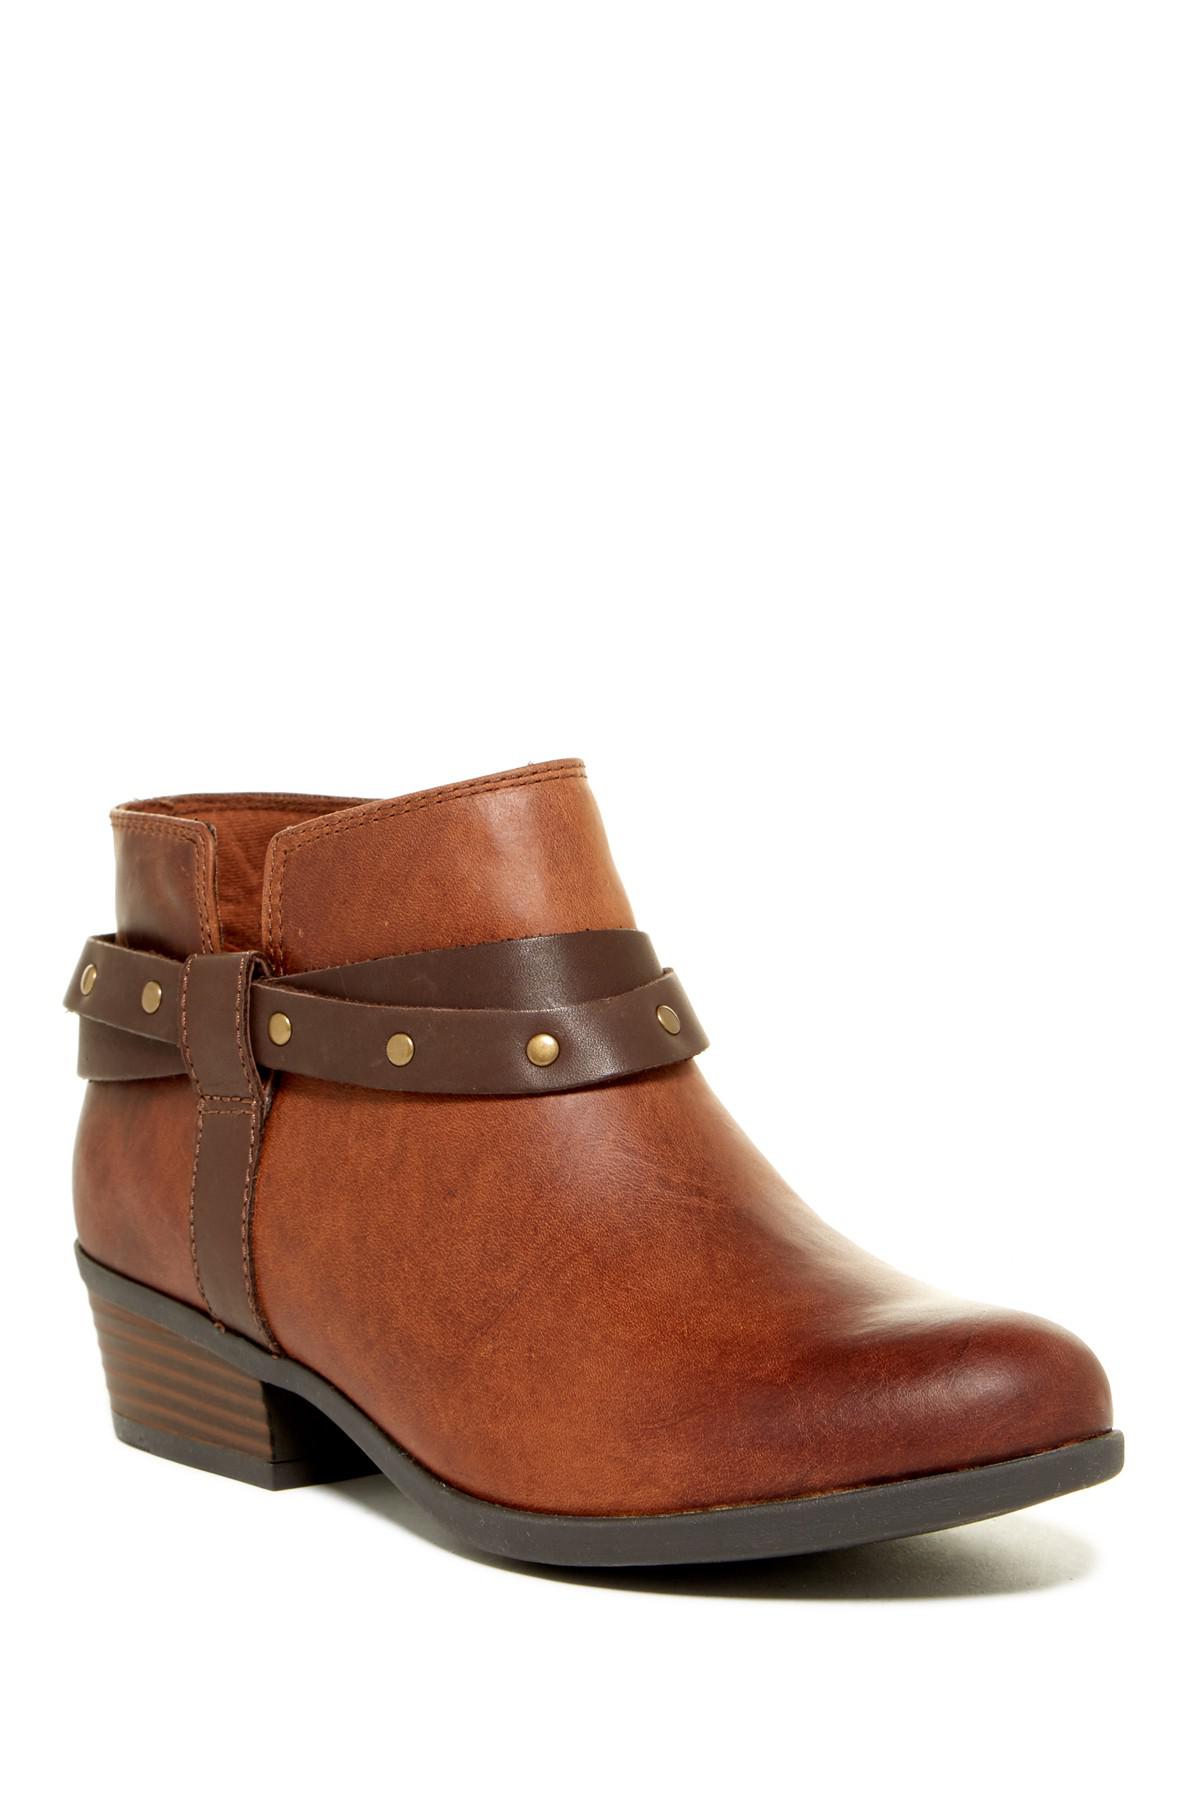 Lyst - Clarks Addiy Zoie Leather Ankle Boot - Wide Width Available in Brown